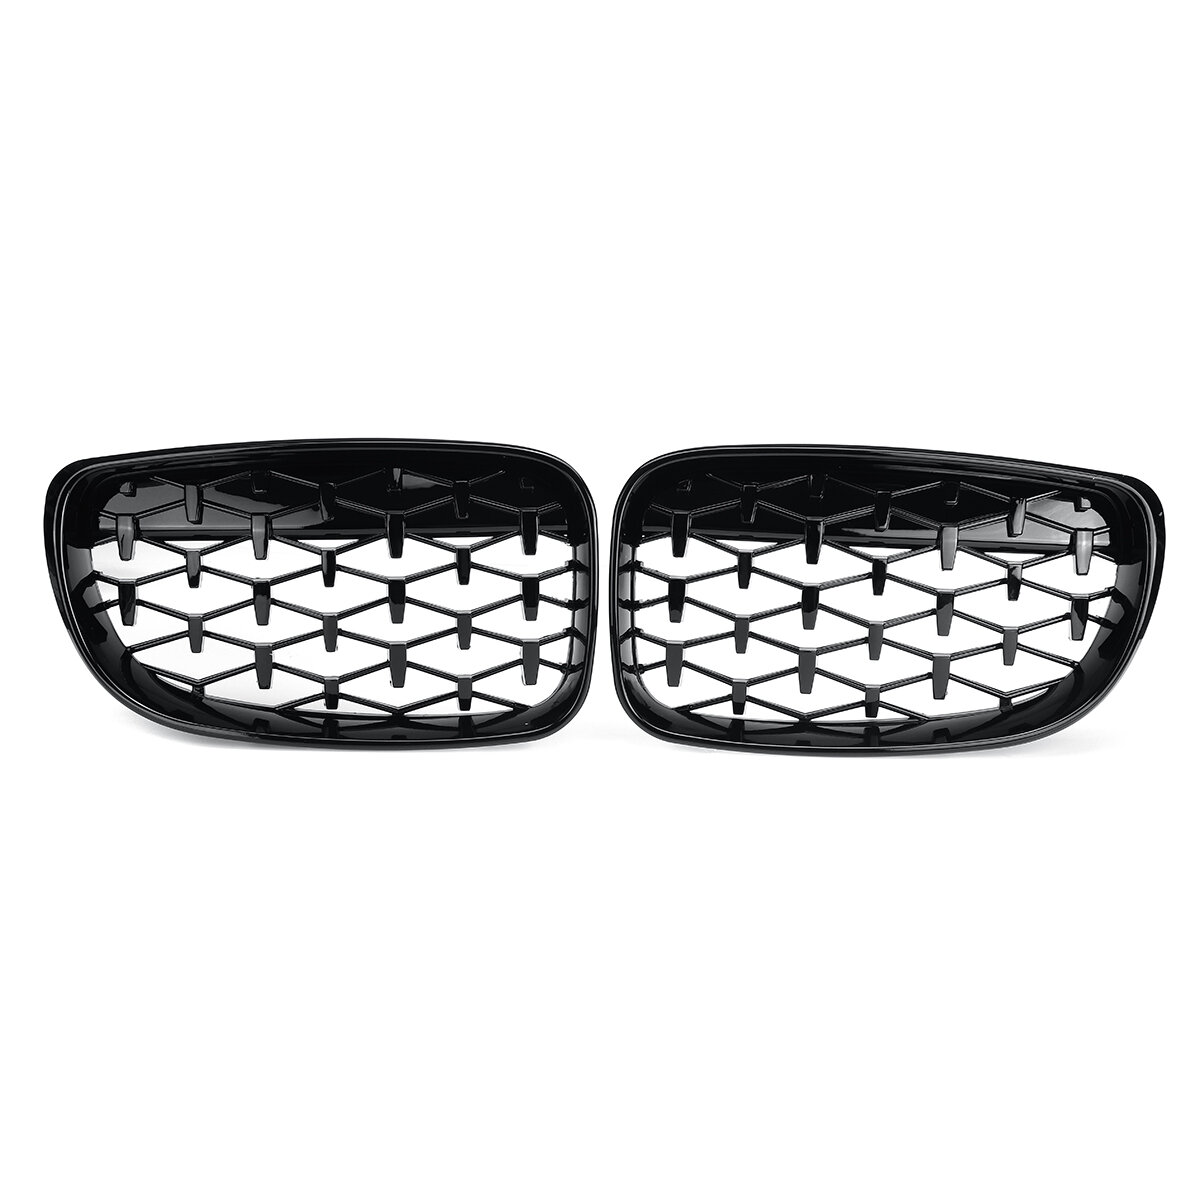 Pair Glossy Black Car Front Kidney Grill Grilles Diamond Style For BMW 1 Series E81 E82 E87 E88 2007